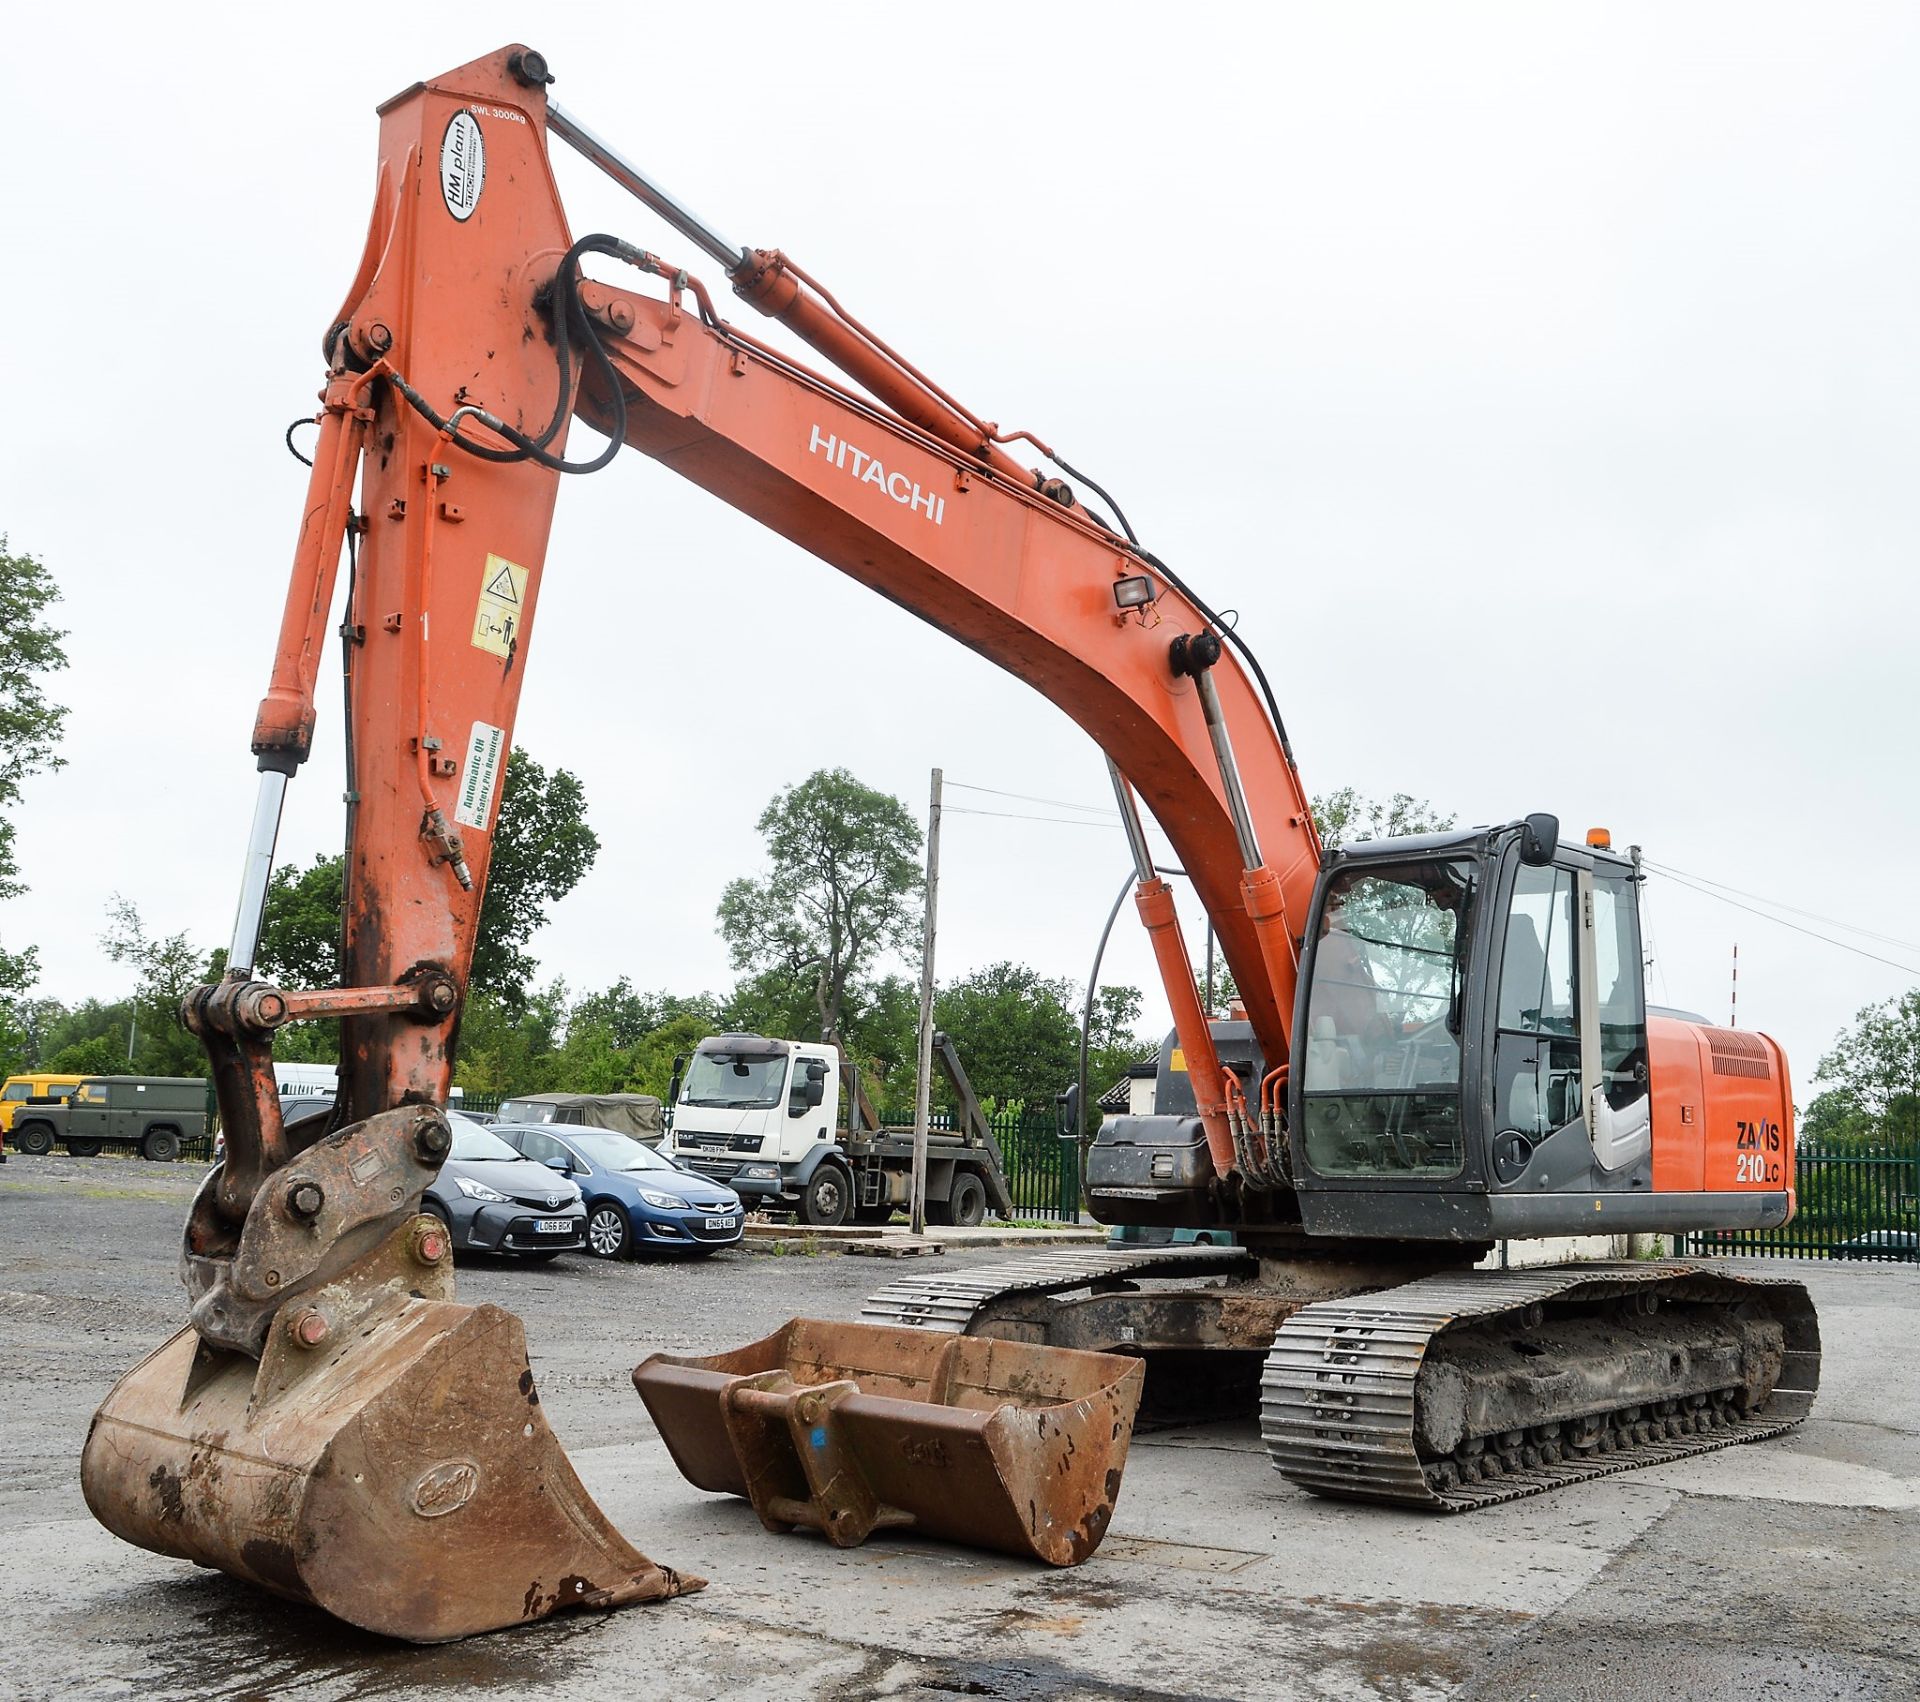 Hitachi Zaxis 210LC 21 tonne steel tracked excavator Year: 2008 S/N: J00206404 Recorded Hours: